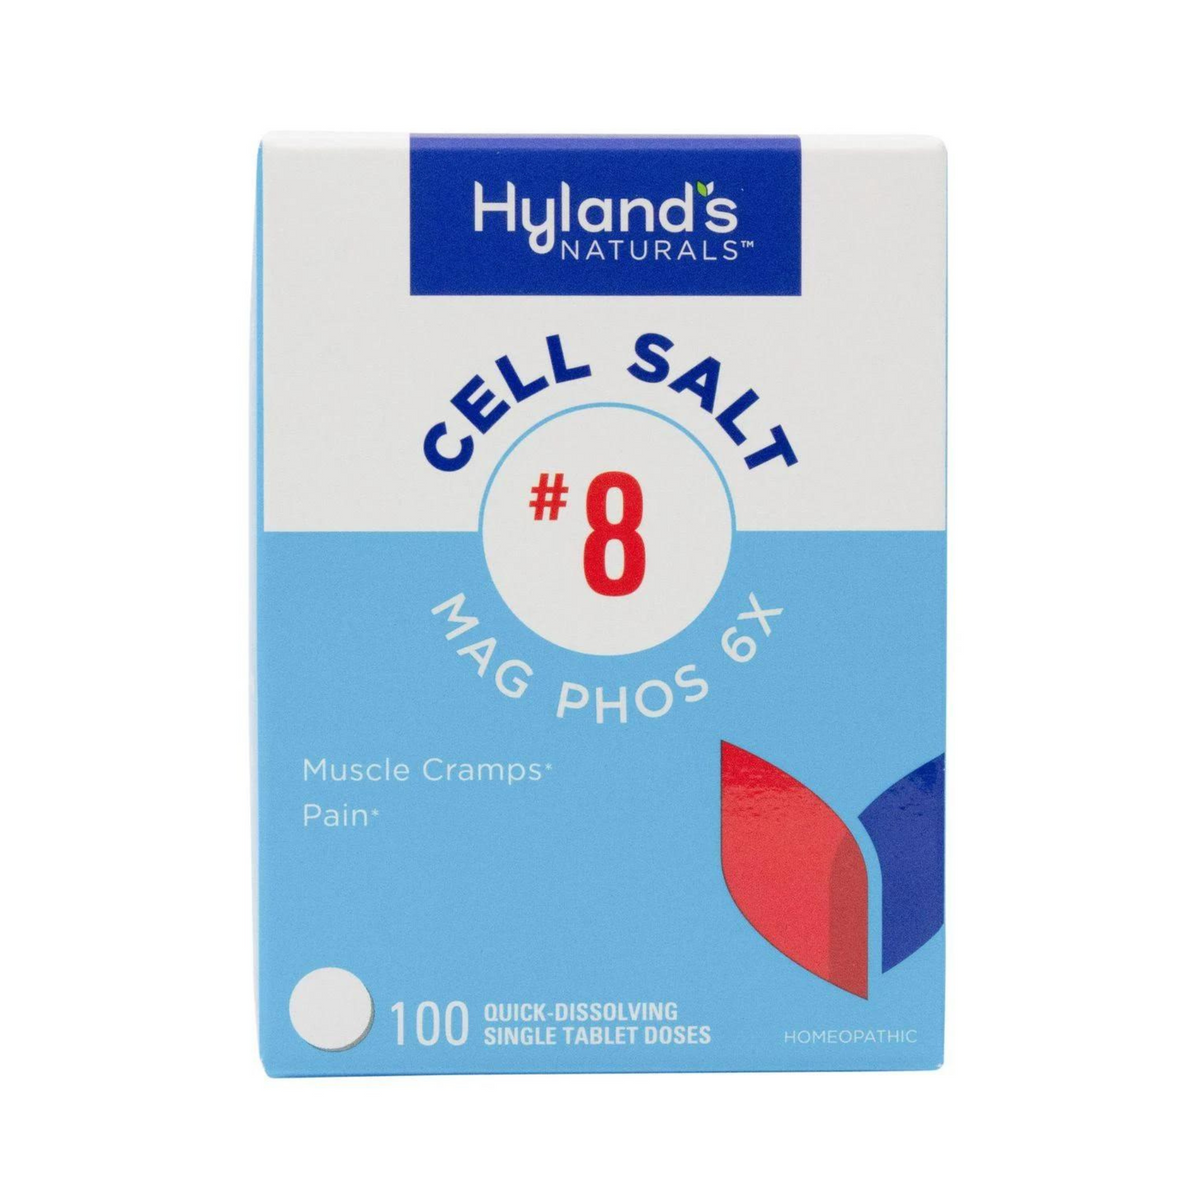 Primary Image of Cell Salt Mag Phos 6x Tablets